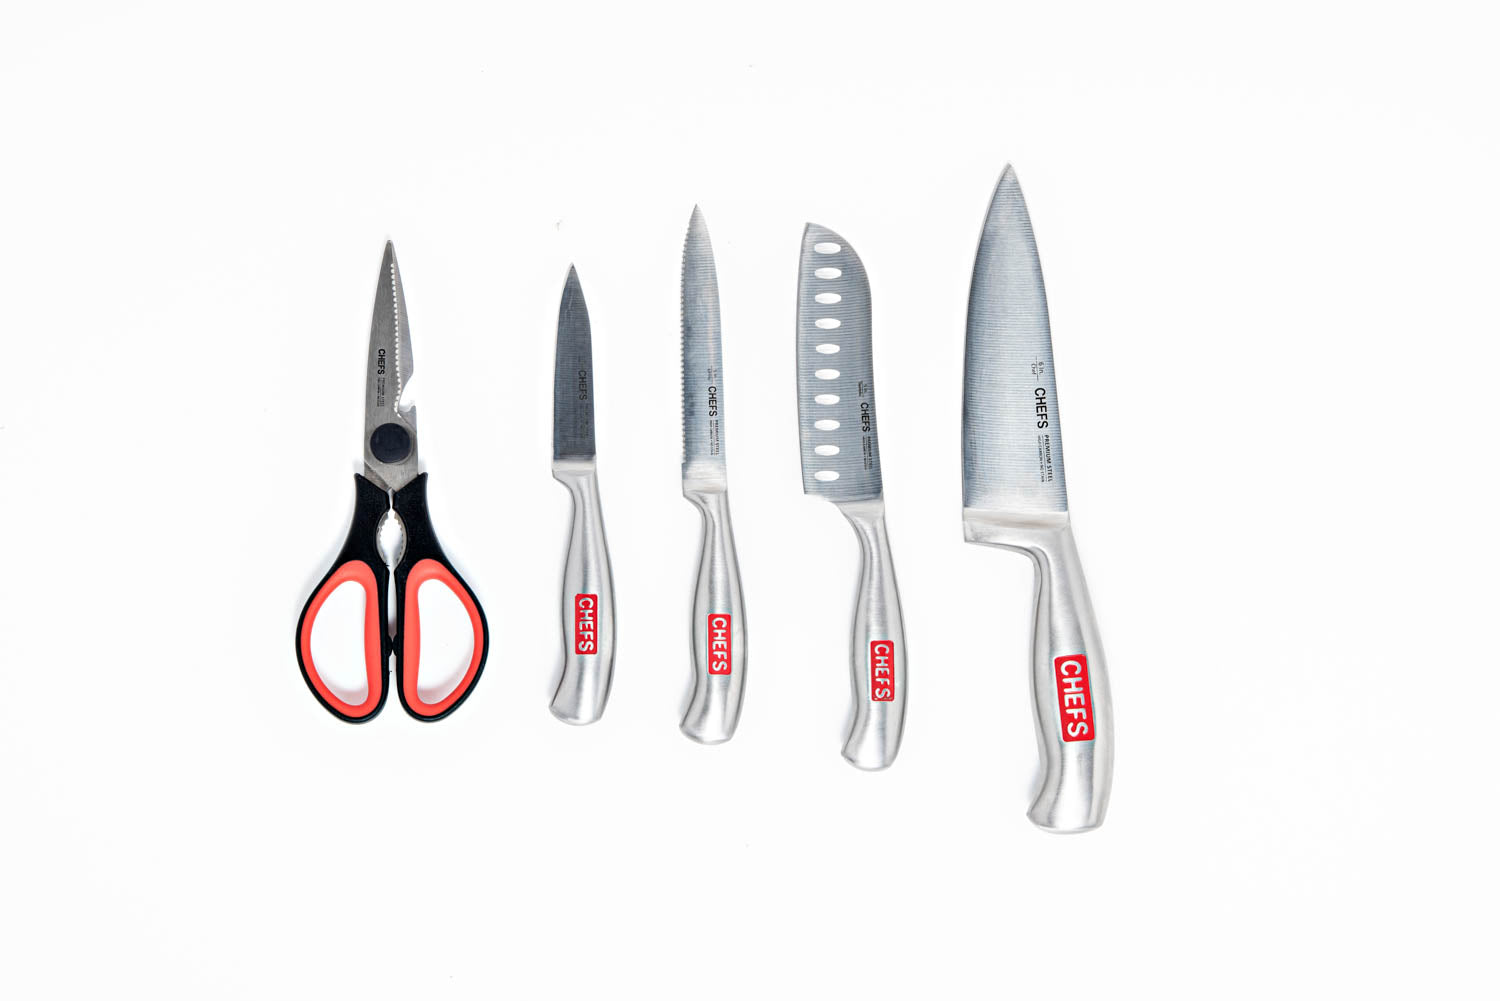 CHEFS 6 Piece Prep Set - Stainless